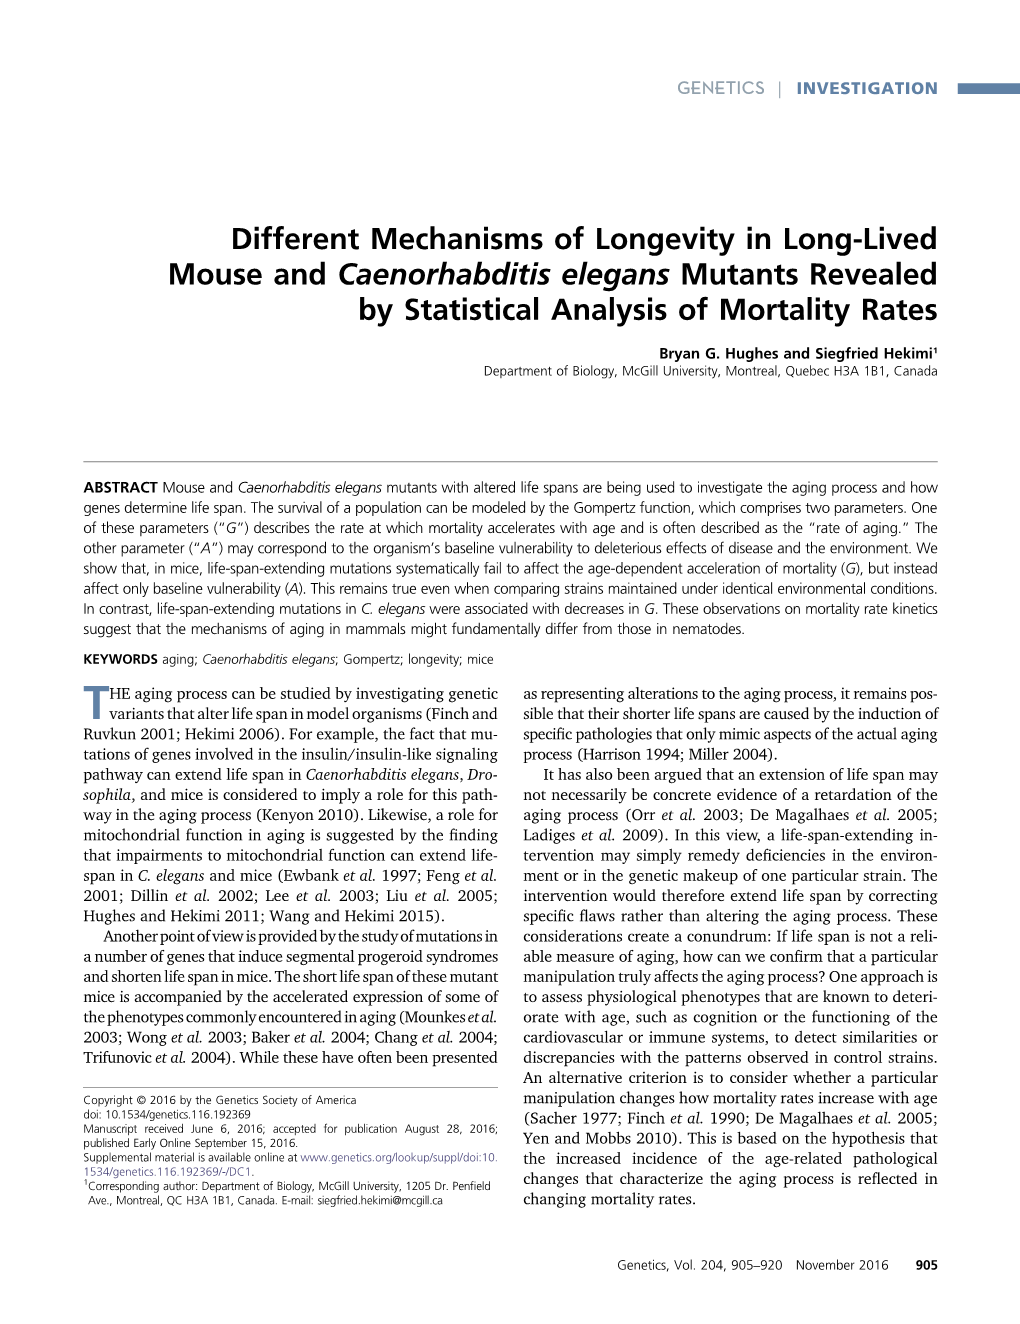 Different Mechanisms of Longevity in Long-Lived Mouse and Caenorhabditis Elegans Mutants Revealed by Statistical Analysis of Mortality Rates